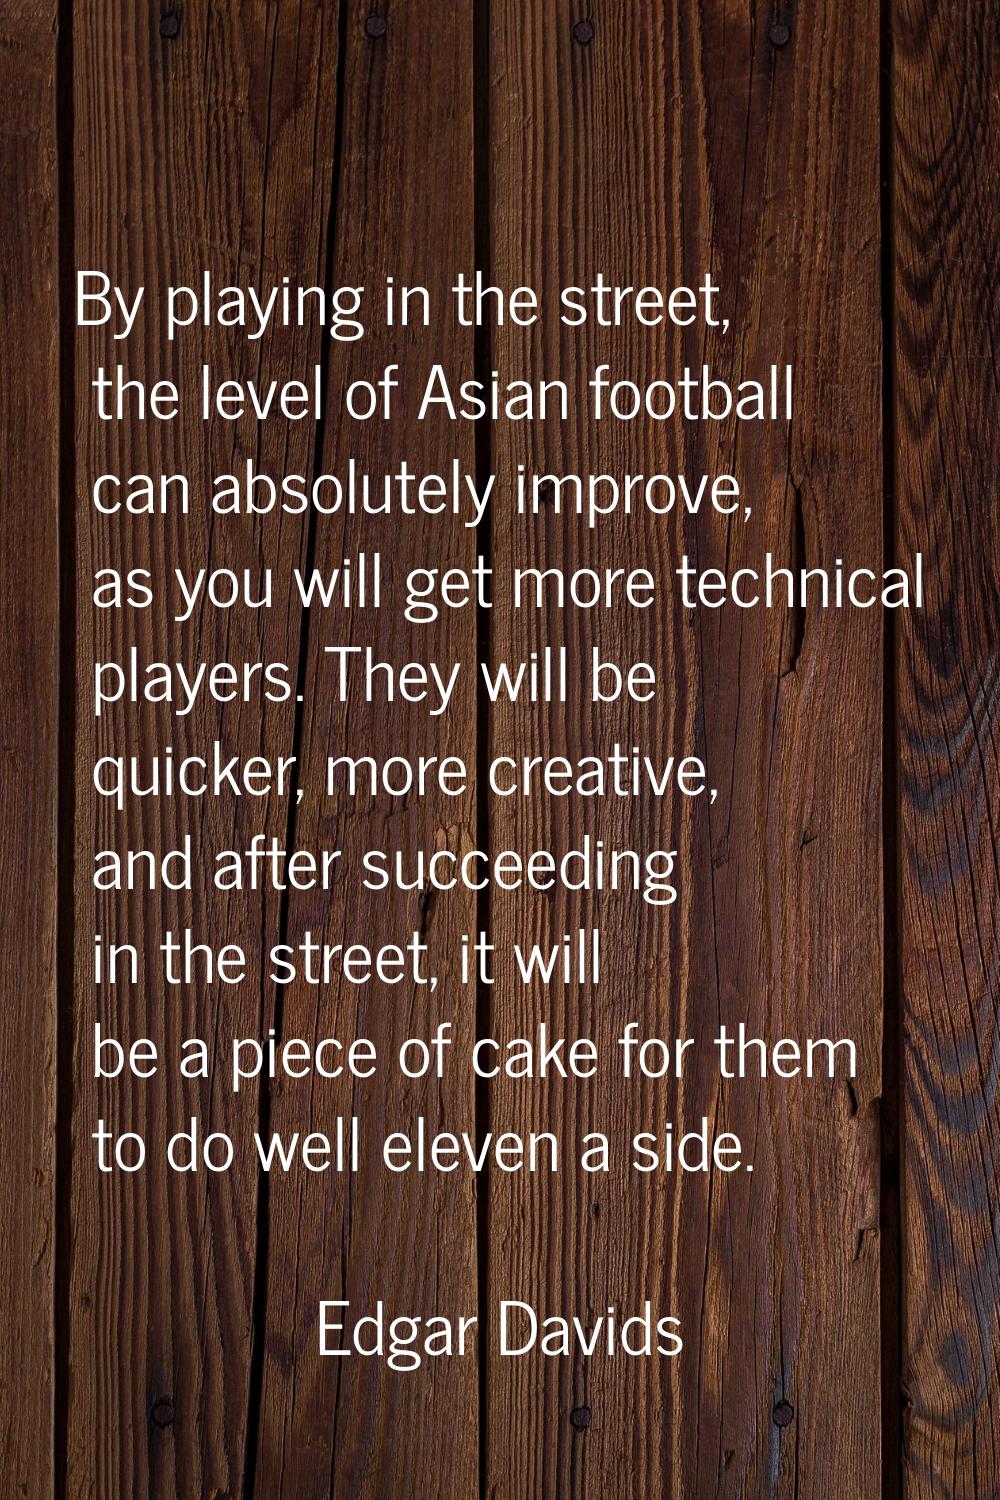 By playing in the street, the level of Asian football can absolutely improve, as you will get more 